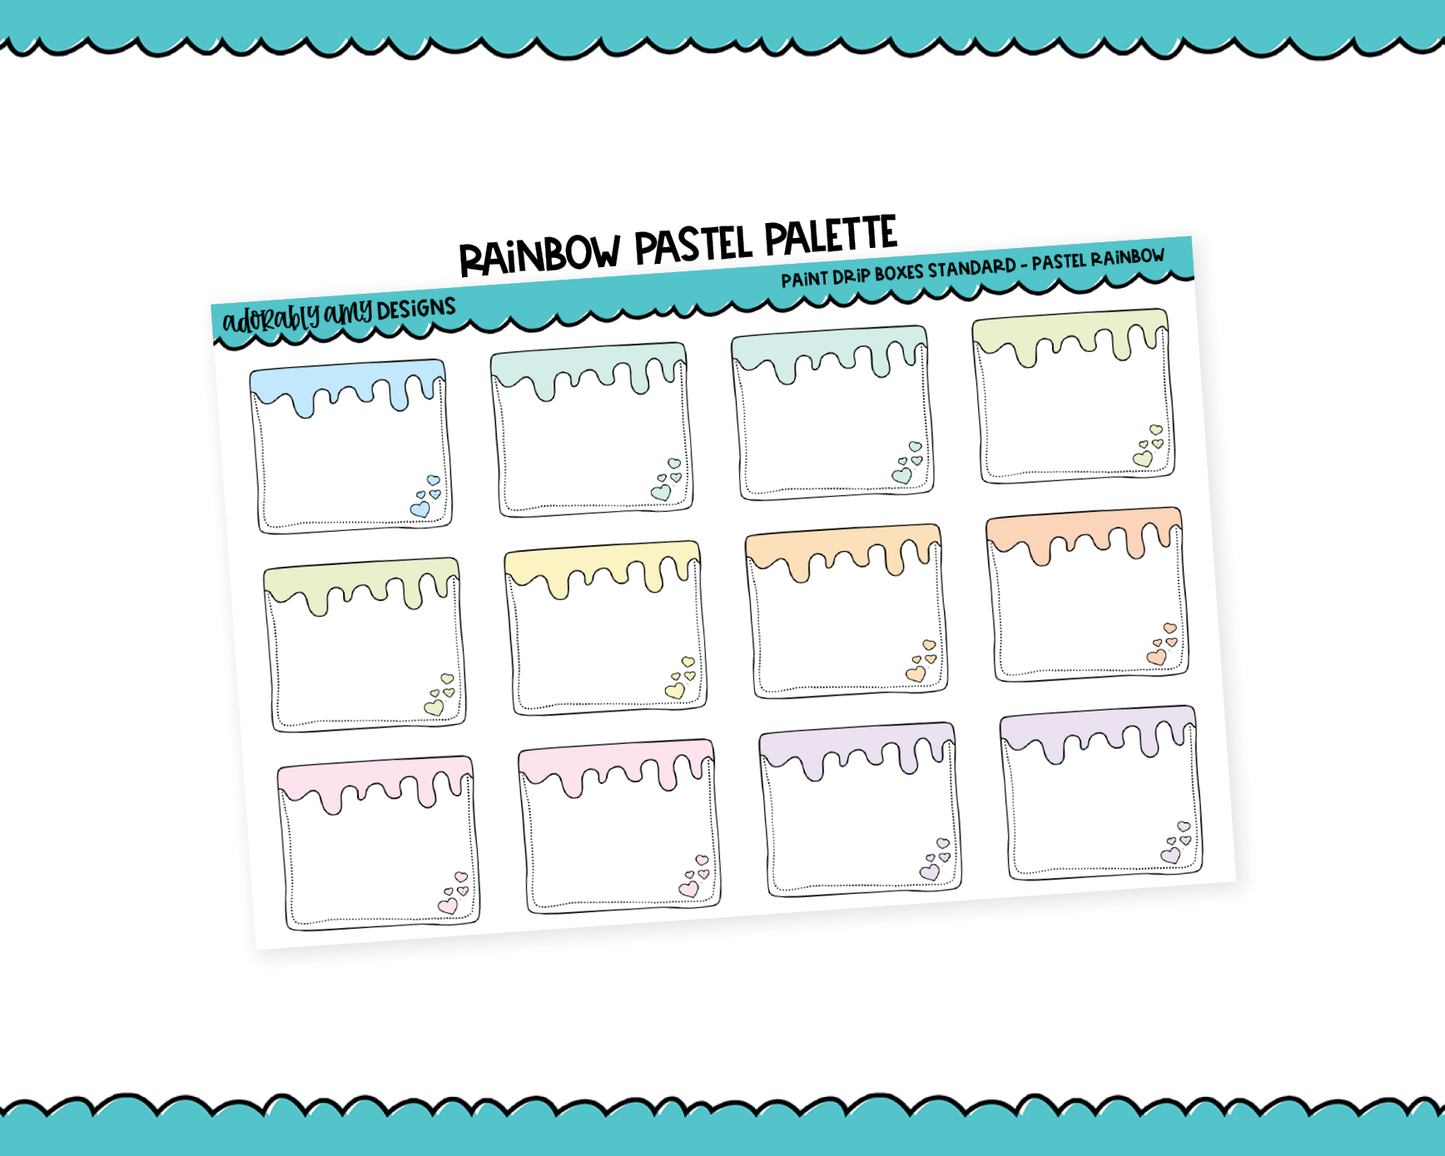 Rainbow Paint Drip Boxes Standard Stickers for any Planner or Insert